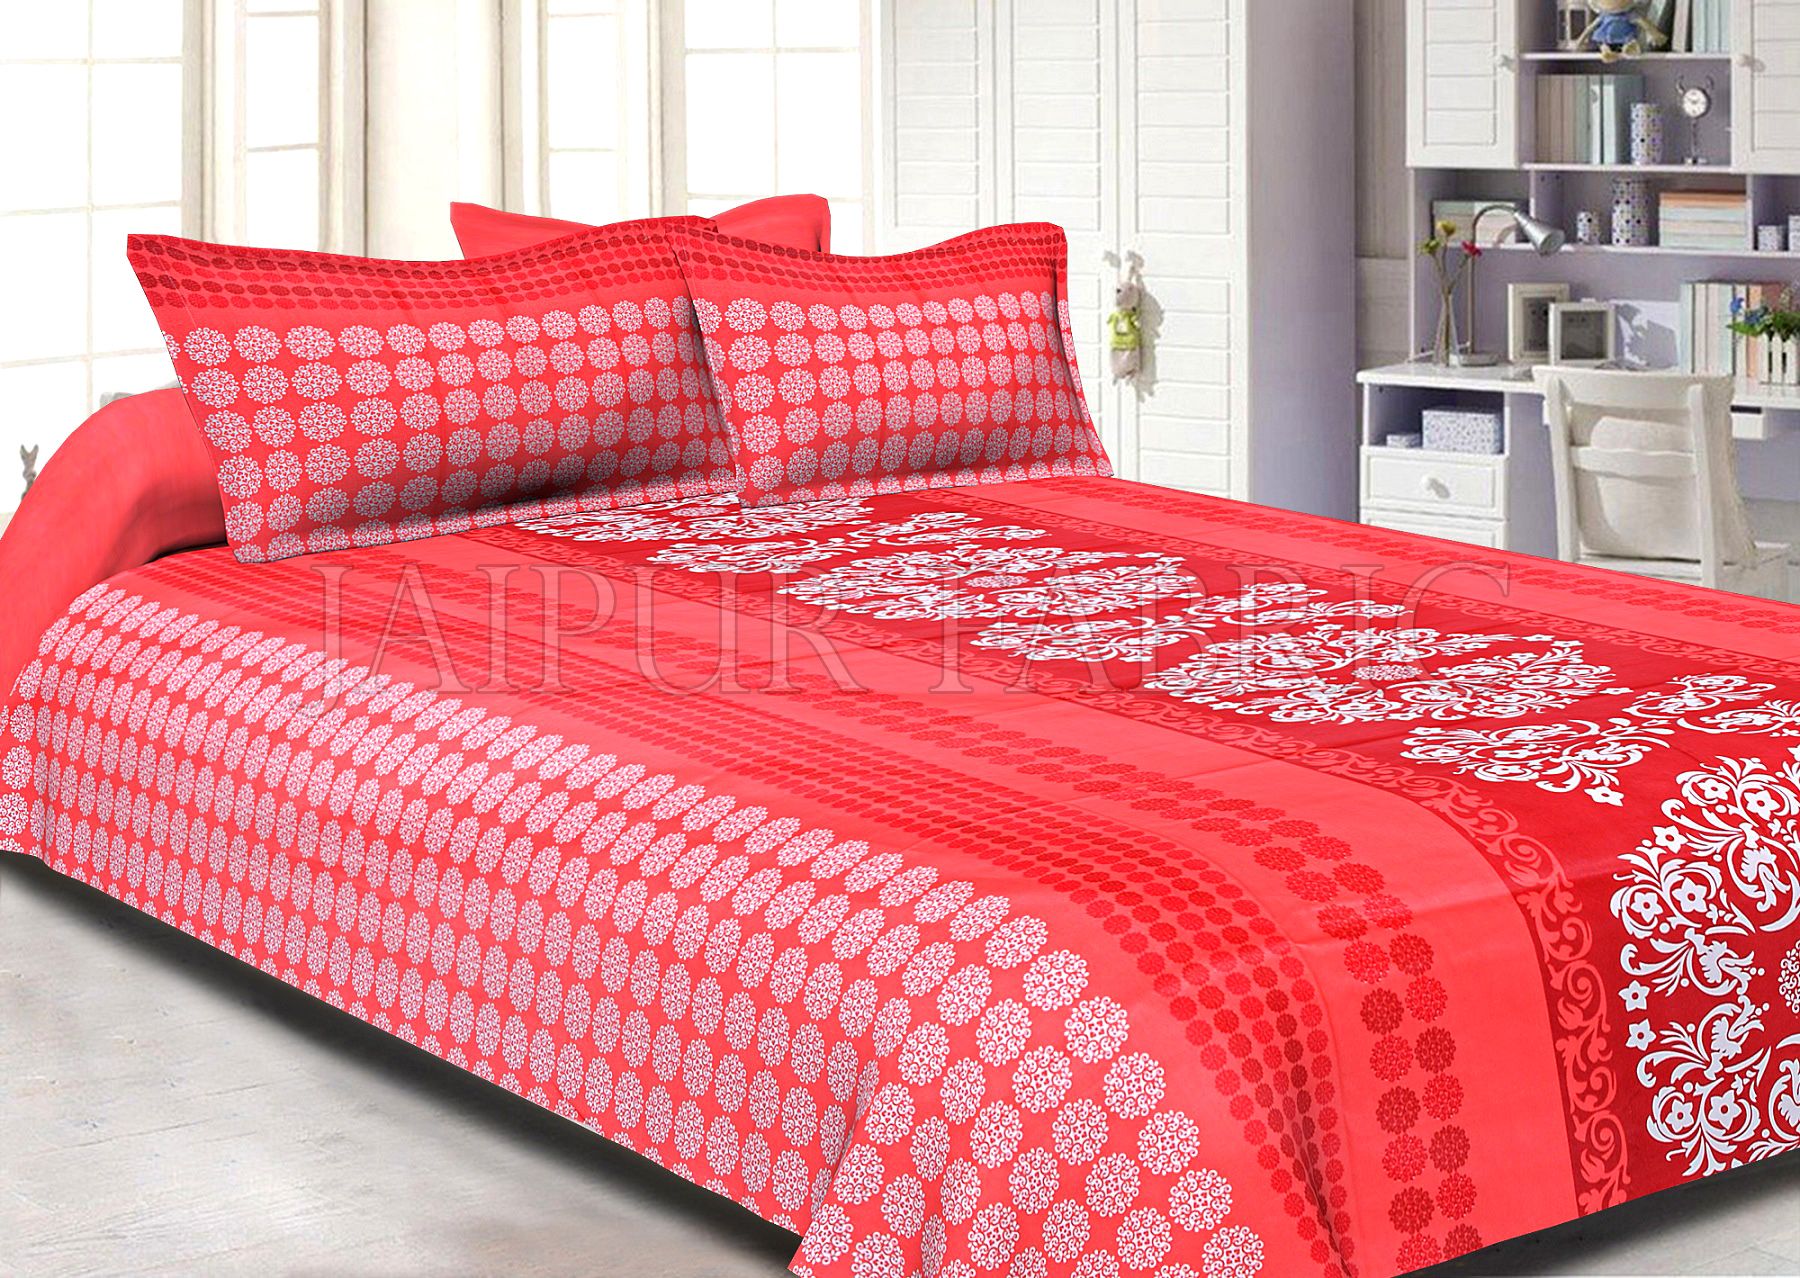 Red Rajasthani Block Printed Cotton Double Bed Sheet